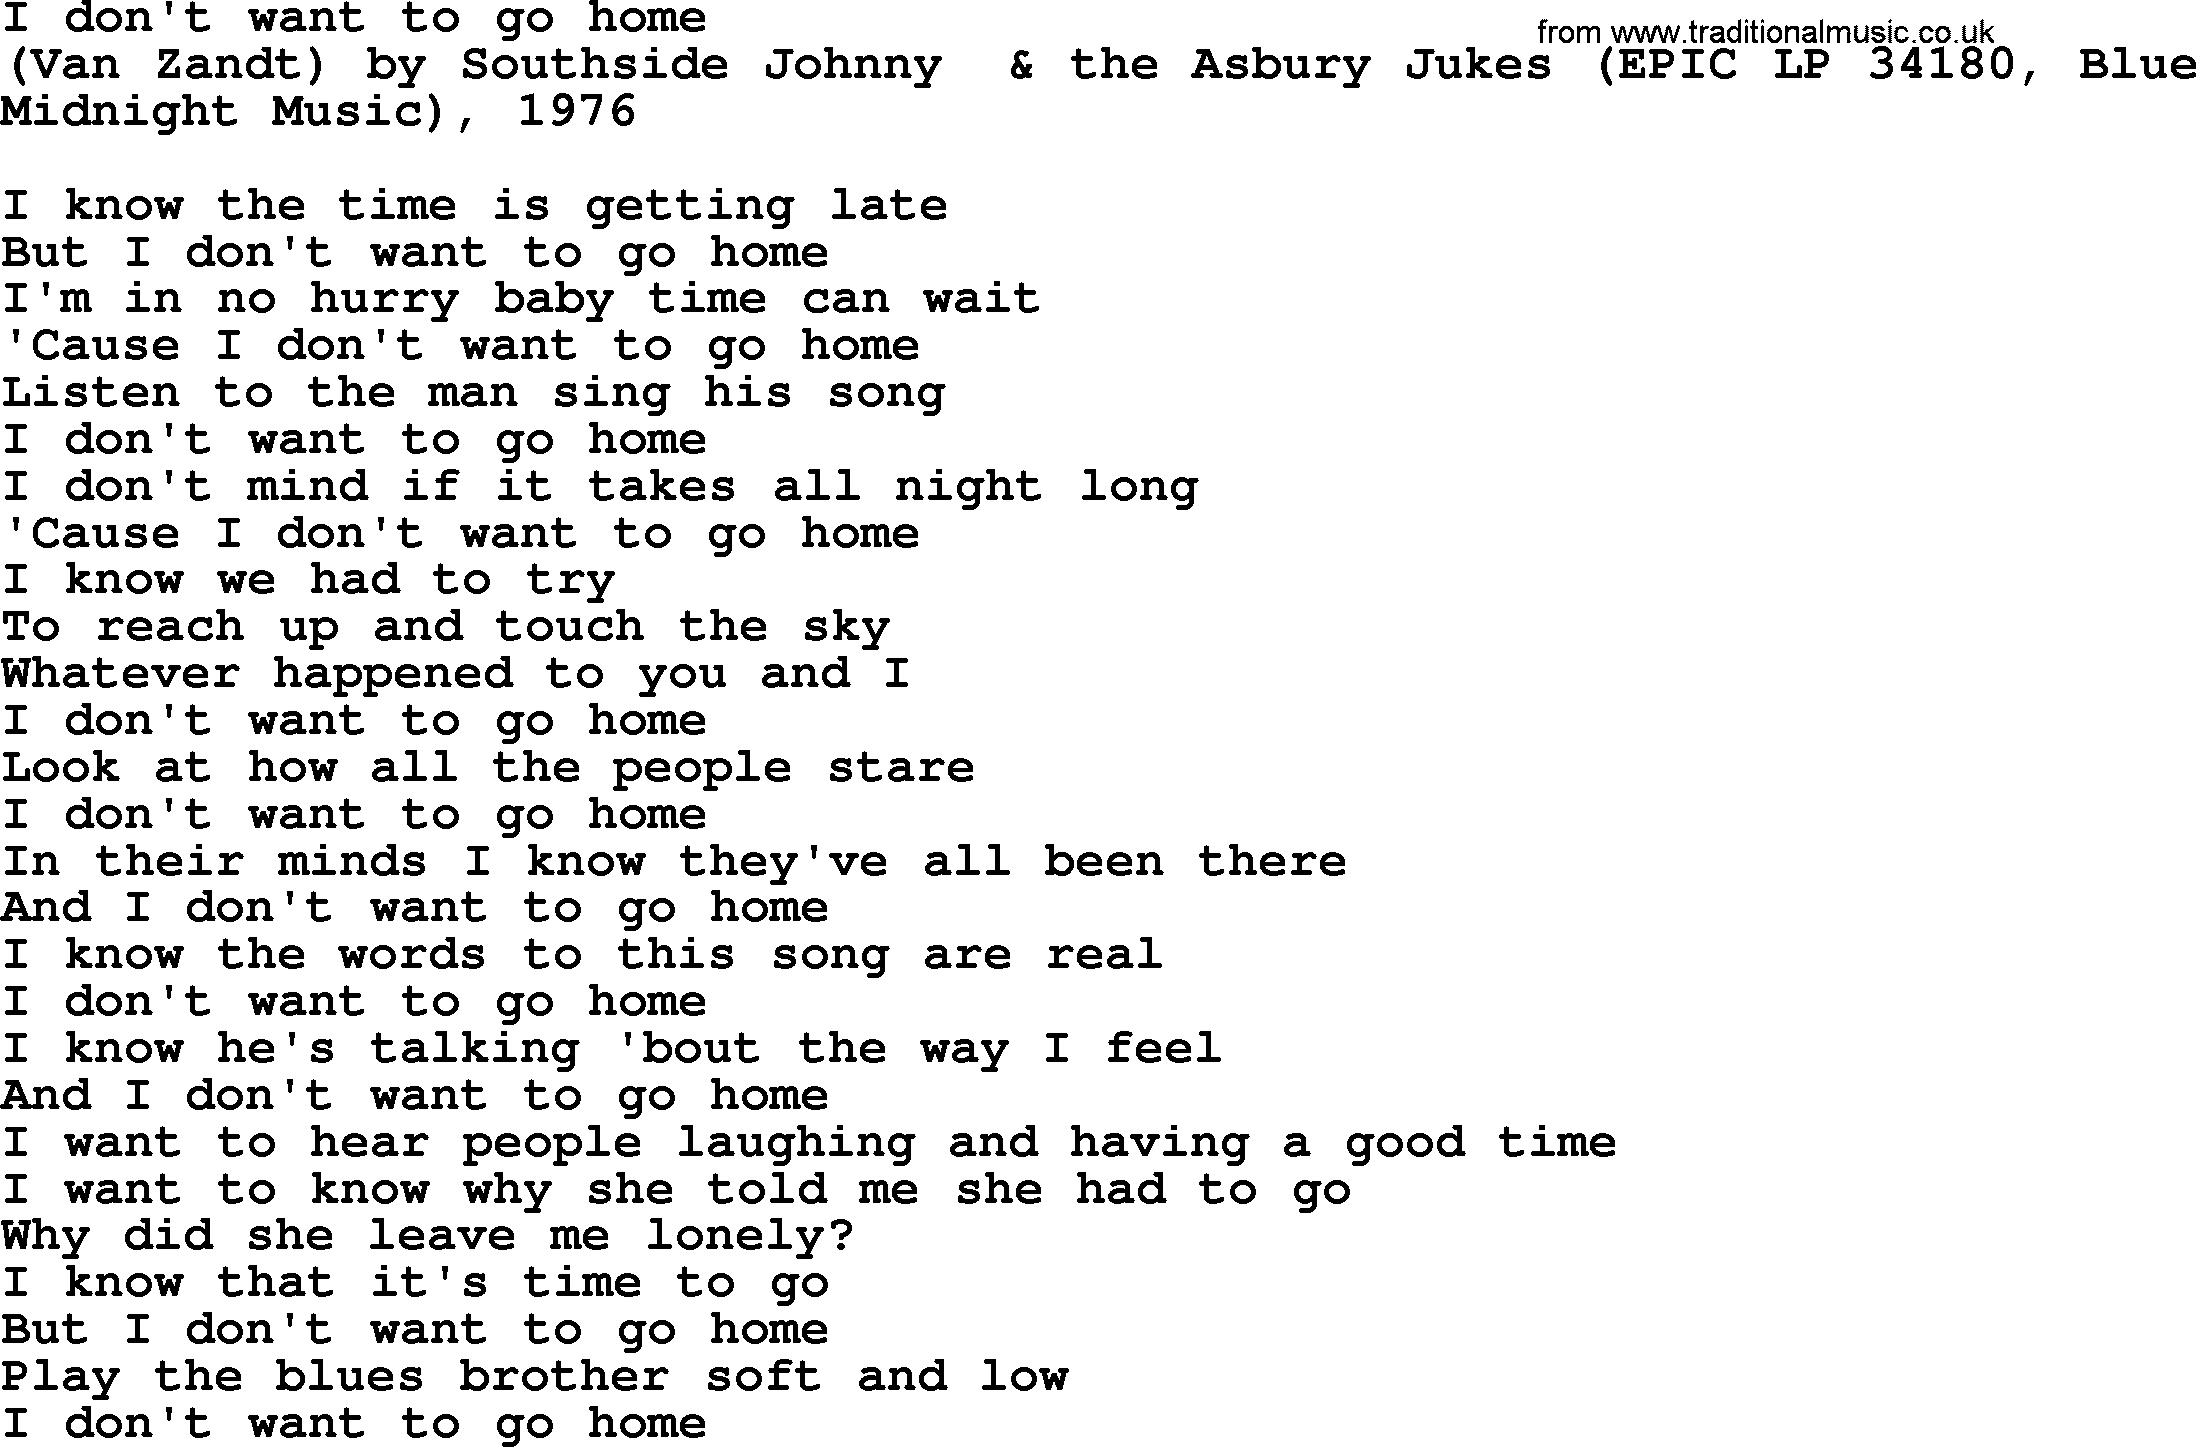 Bruce Springsteen song: I Don't Want To Go Home lyrics